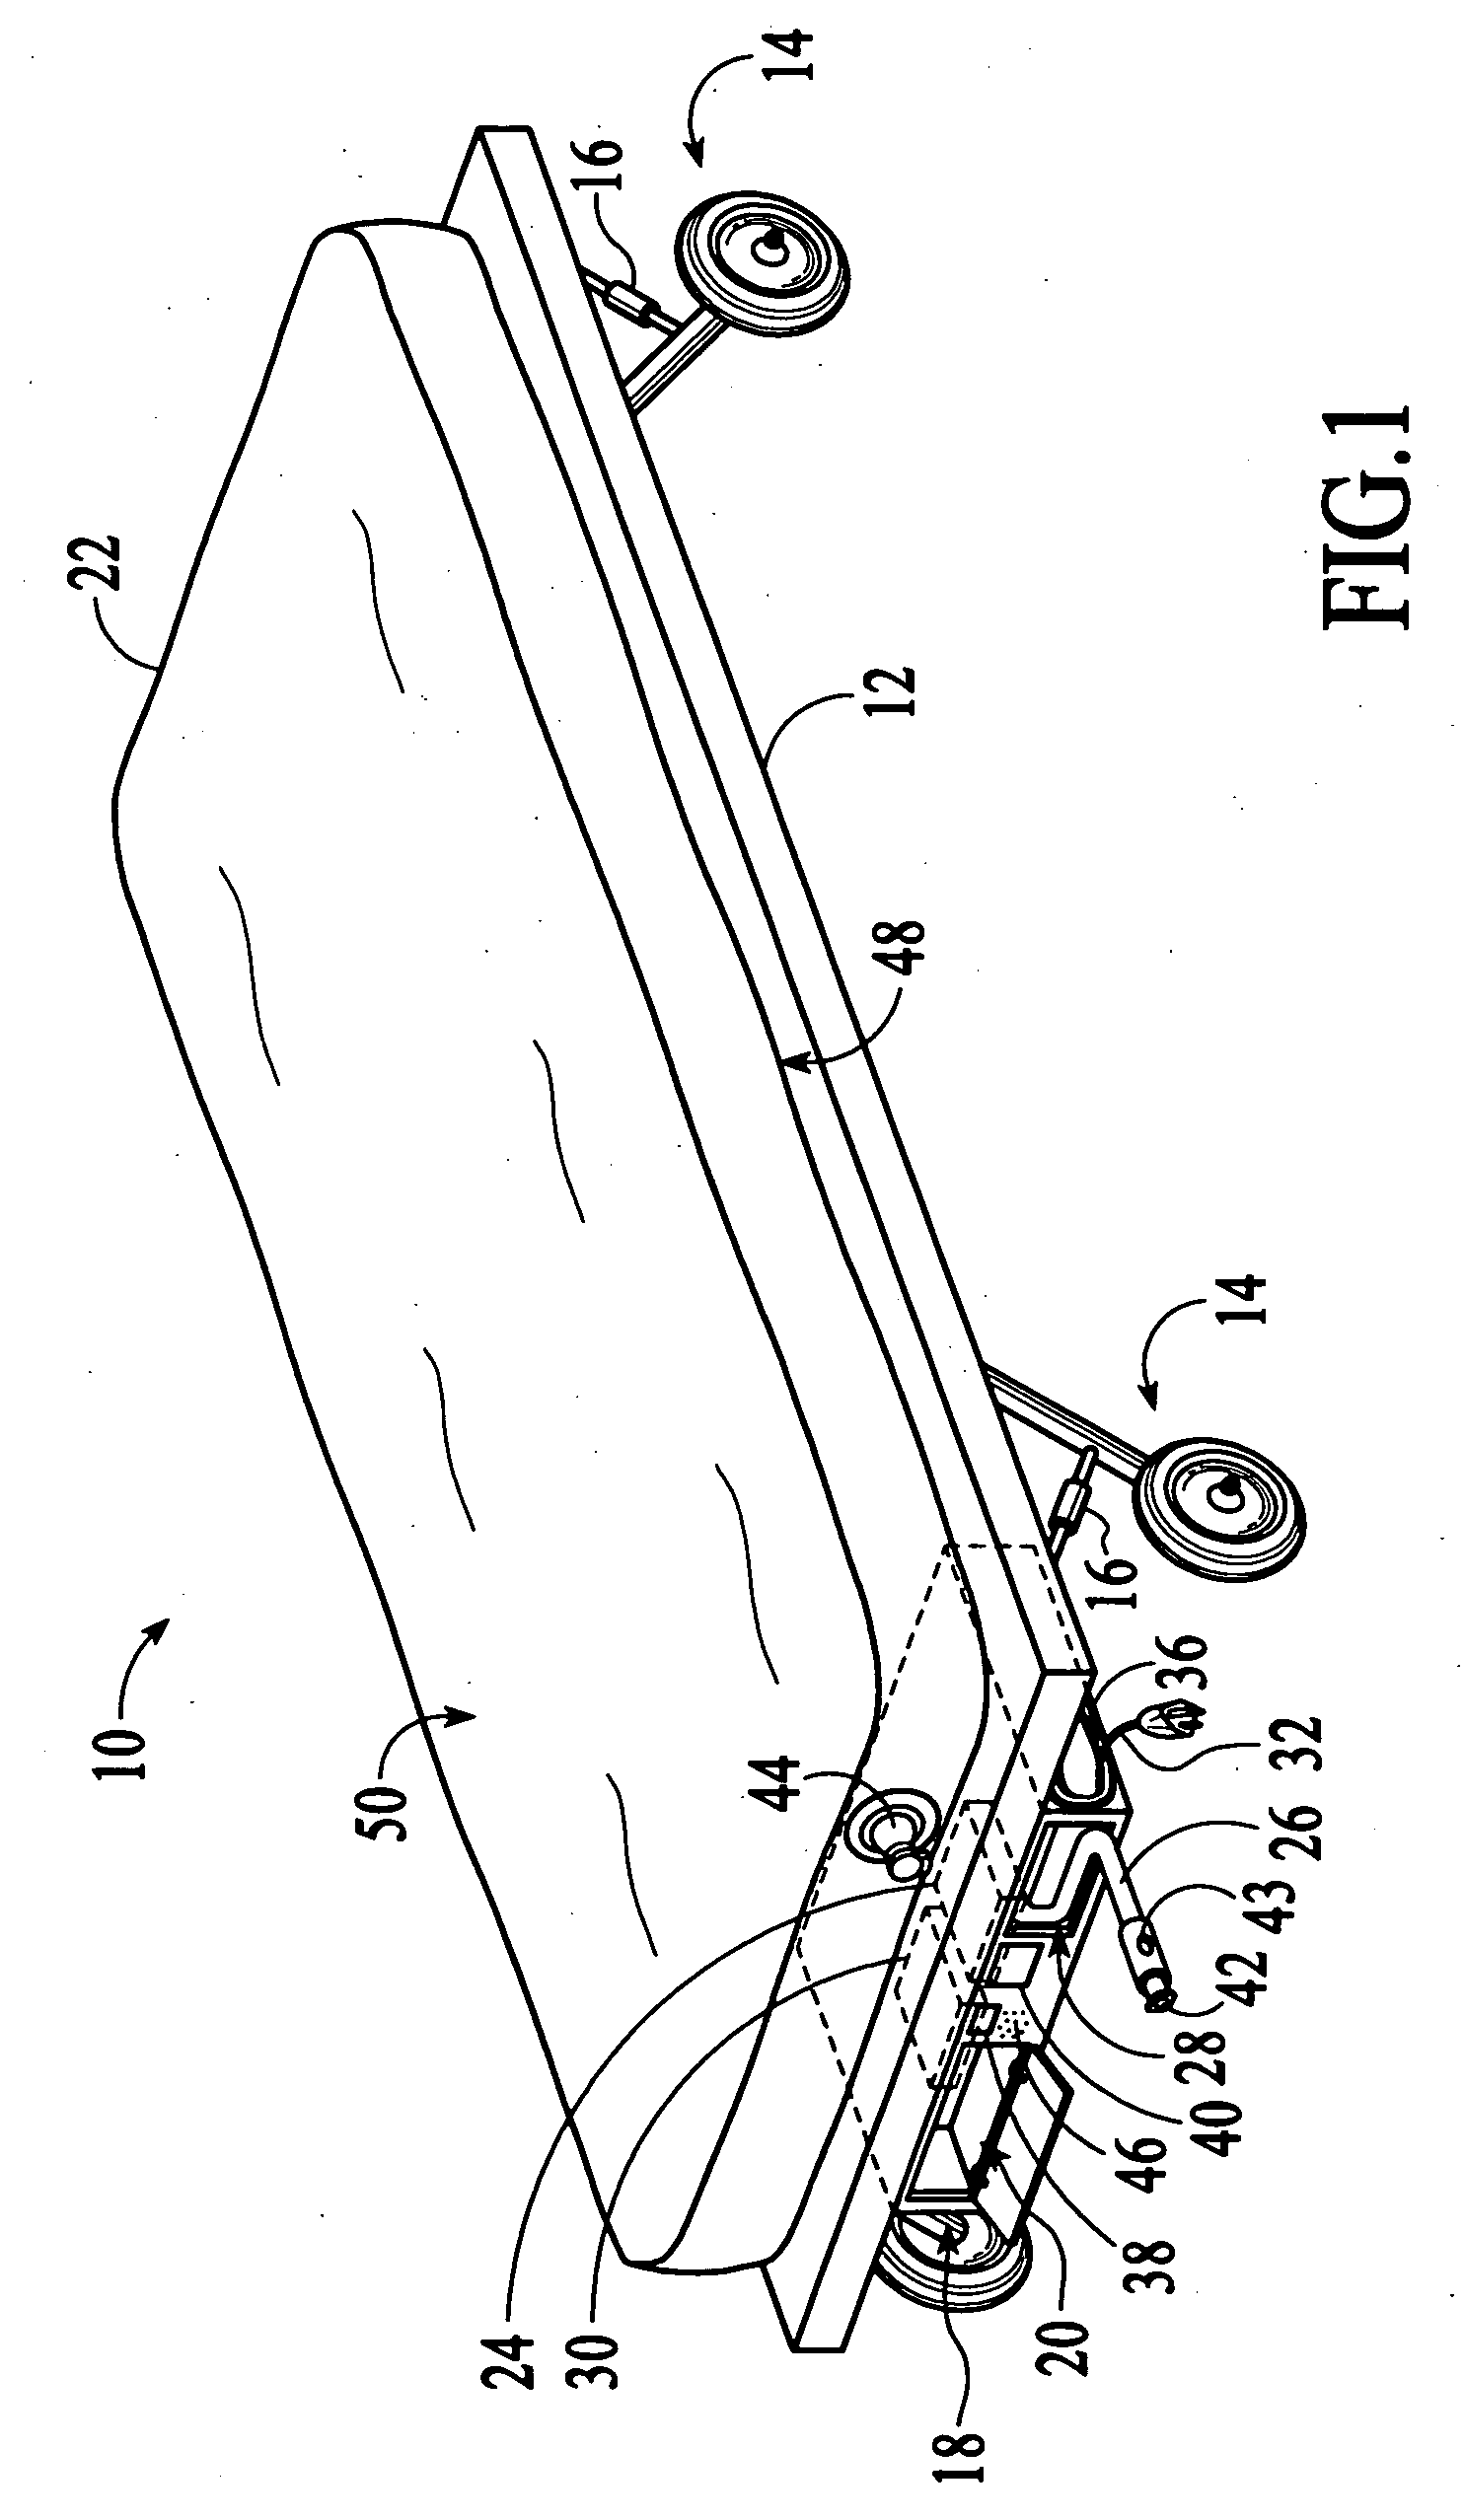 Method and apparatus for transferring patients